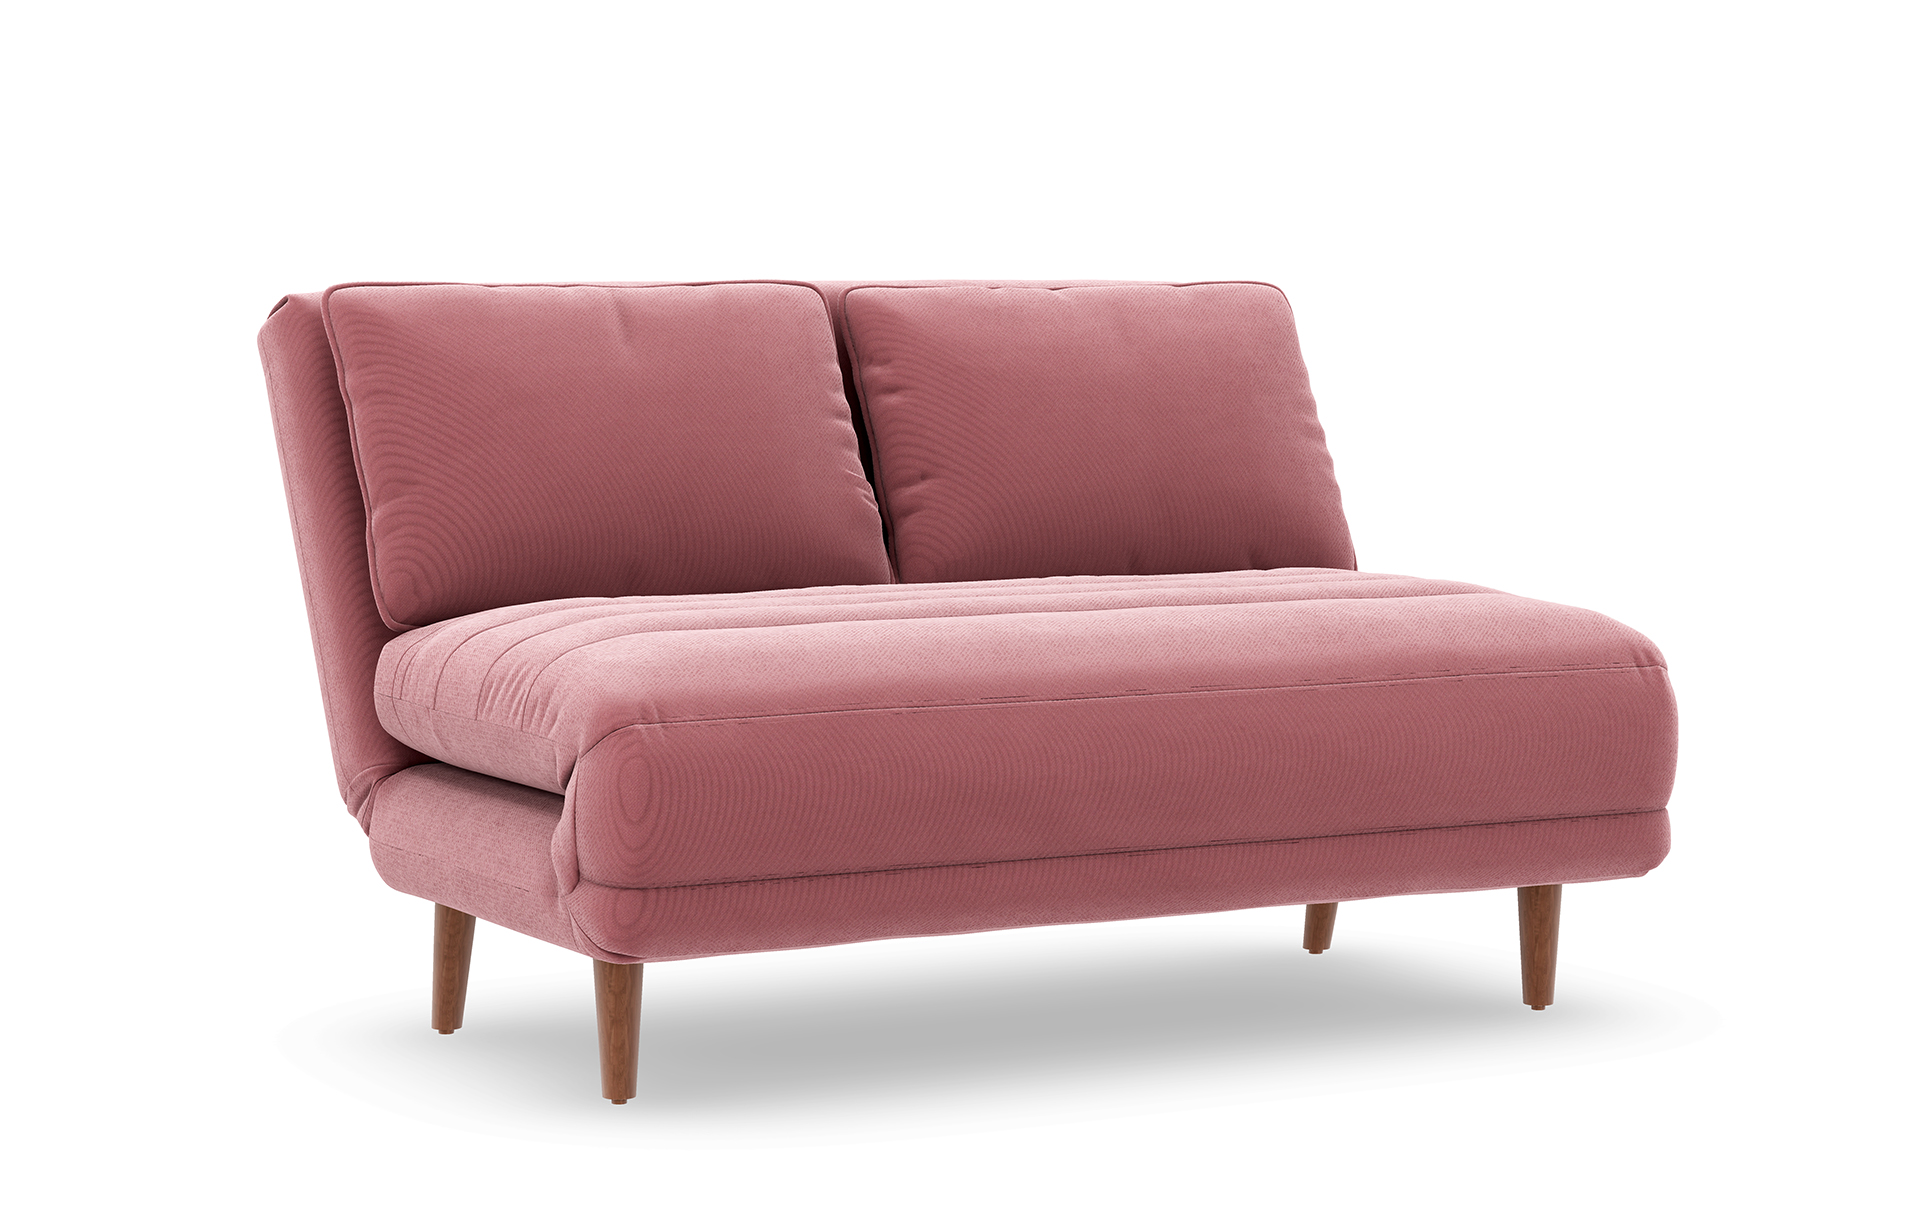 Love Made S Insta Famous Haru Sofa Bed, Best Small Sofa Beds Australia